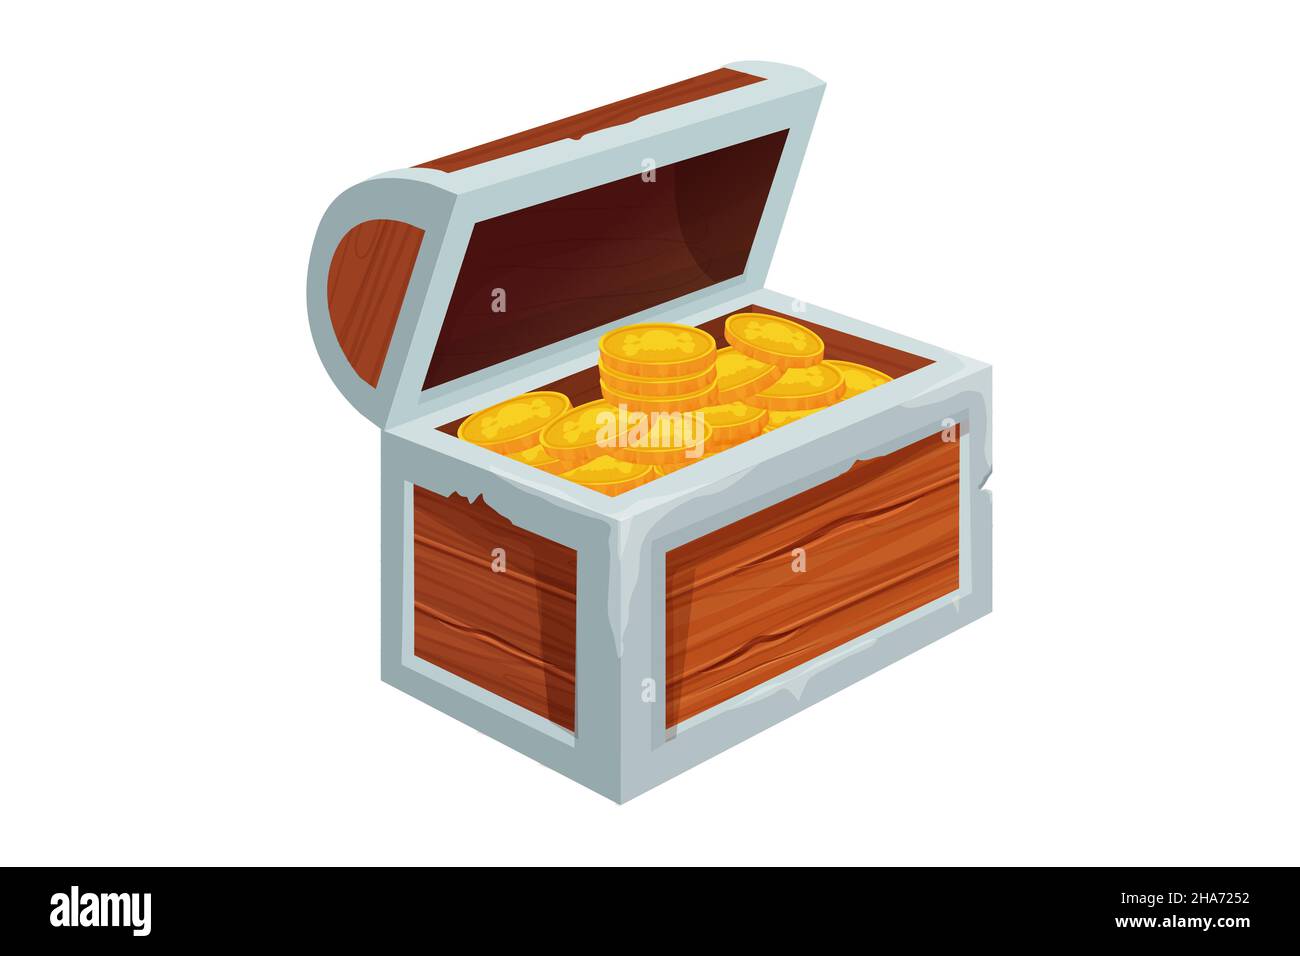 https://c8.alamy.com/comp/2HA7252/treasure-chest-full-of-golden-coins-in-cartoon-style-isolated-on-white-background-game-asset-ui-open-wooden-textured-object-vector-illustration-2HA7252.jpg